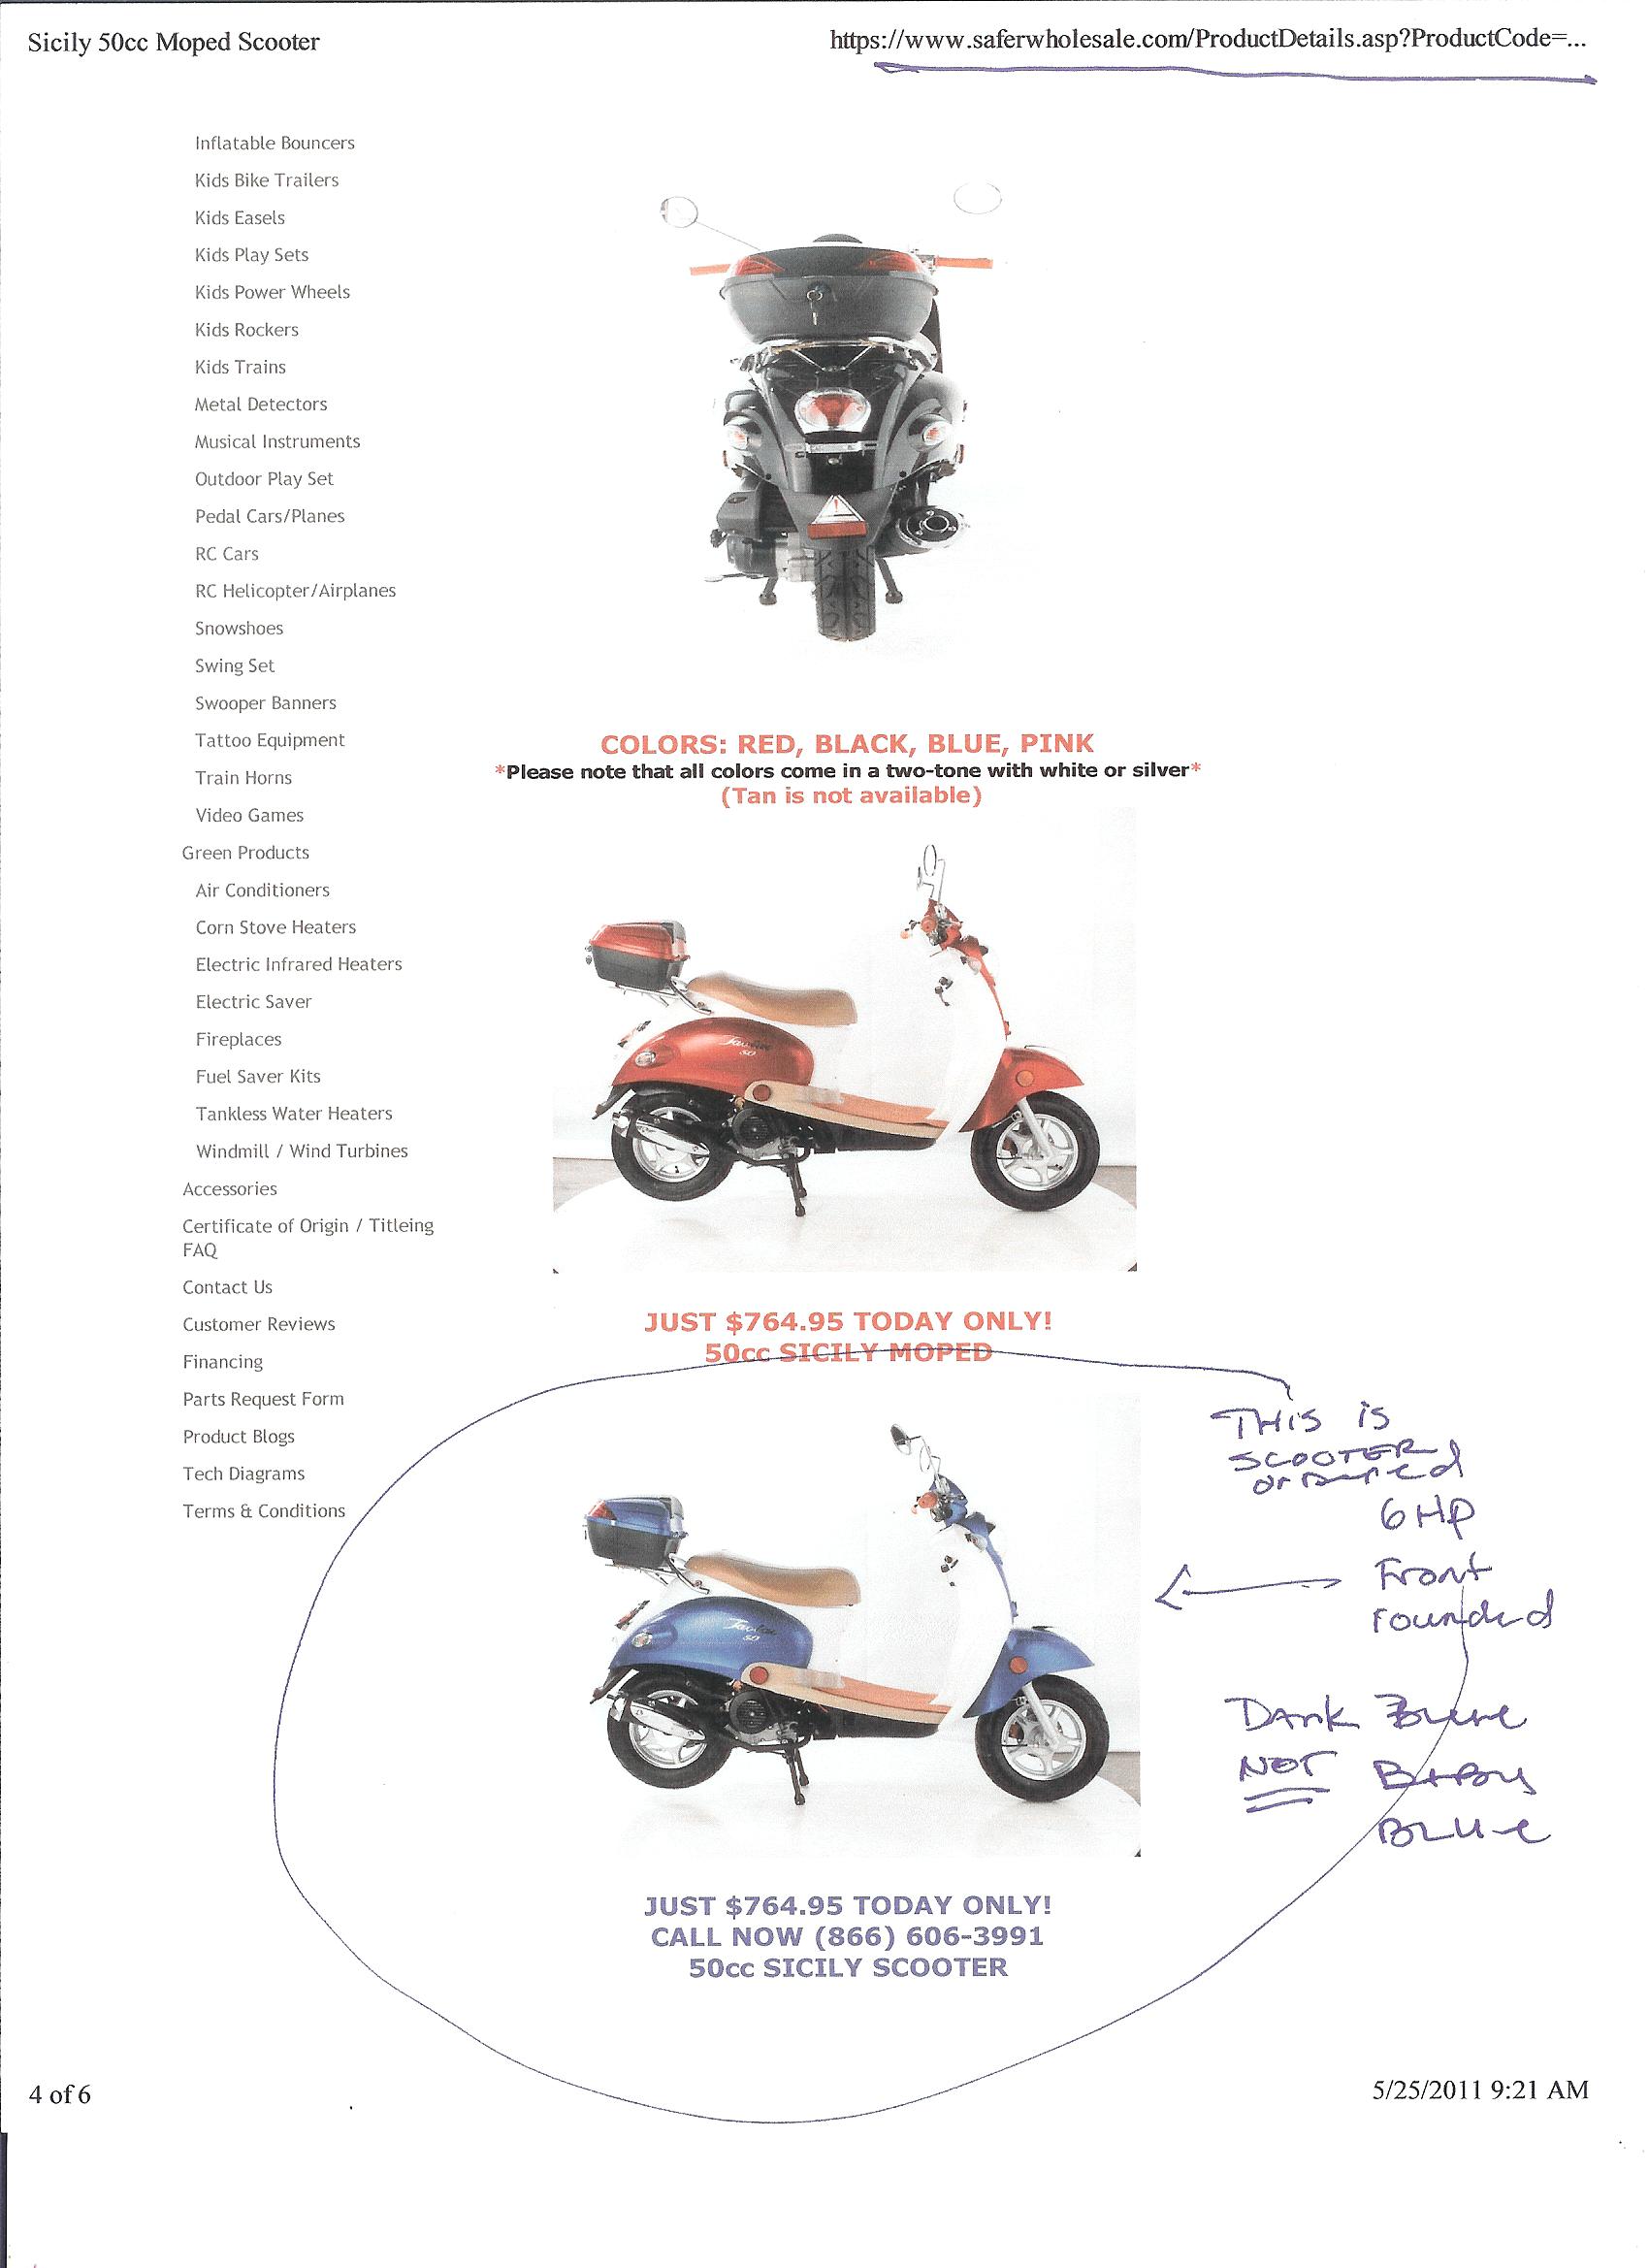 Pics of Sicily 50cc scooter ordered online